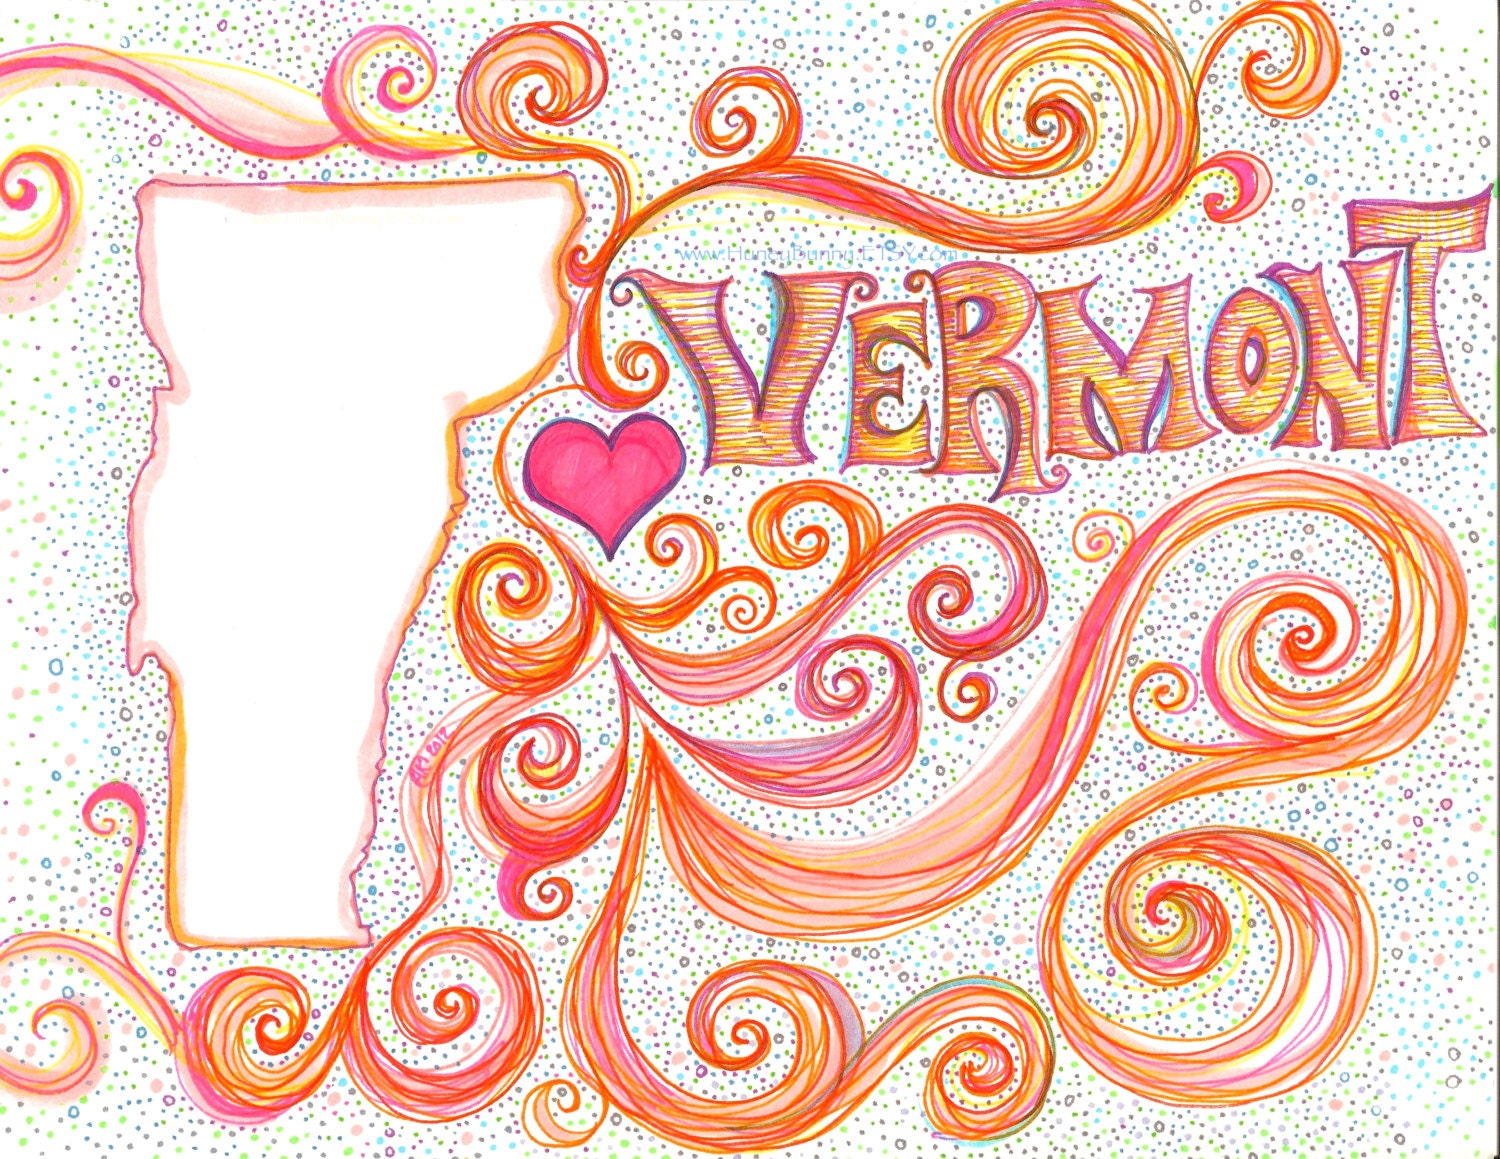 Vermont - I Love Vermont  - Drawing. Original Whimsical Work with Sharpies and Copic markers. Art from Allie Kelley